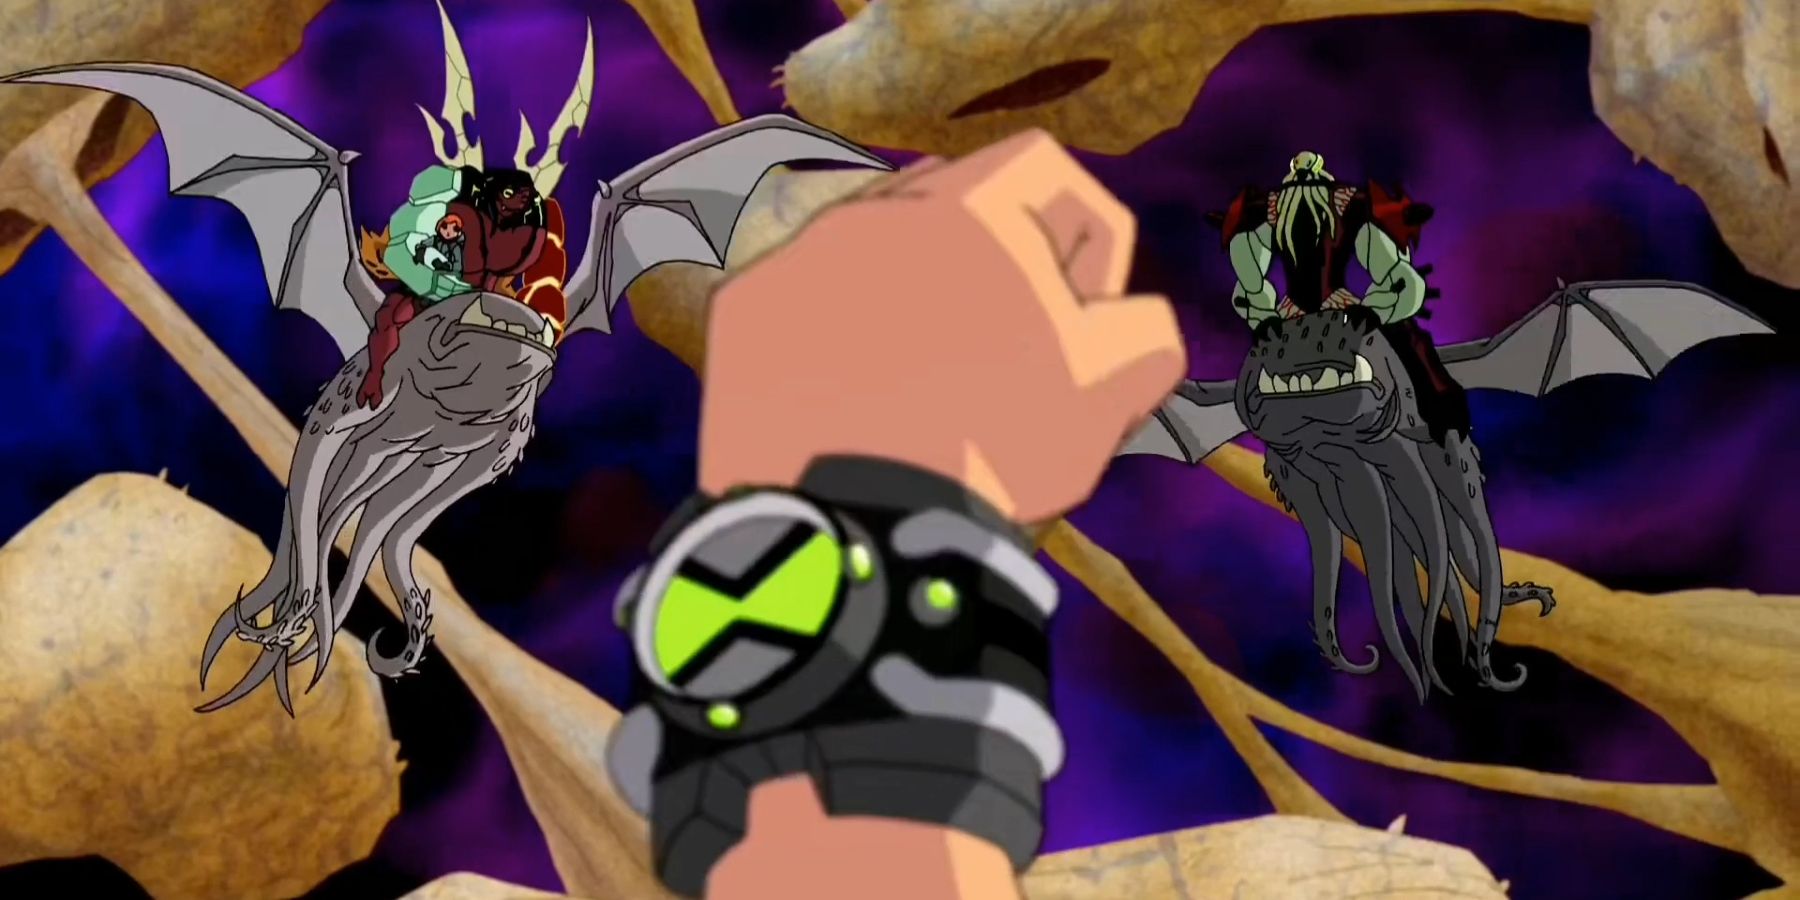 Ben giving up the Omnitrix to Vilgax and Kevin in Ben 10